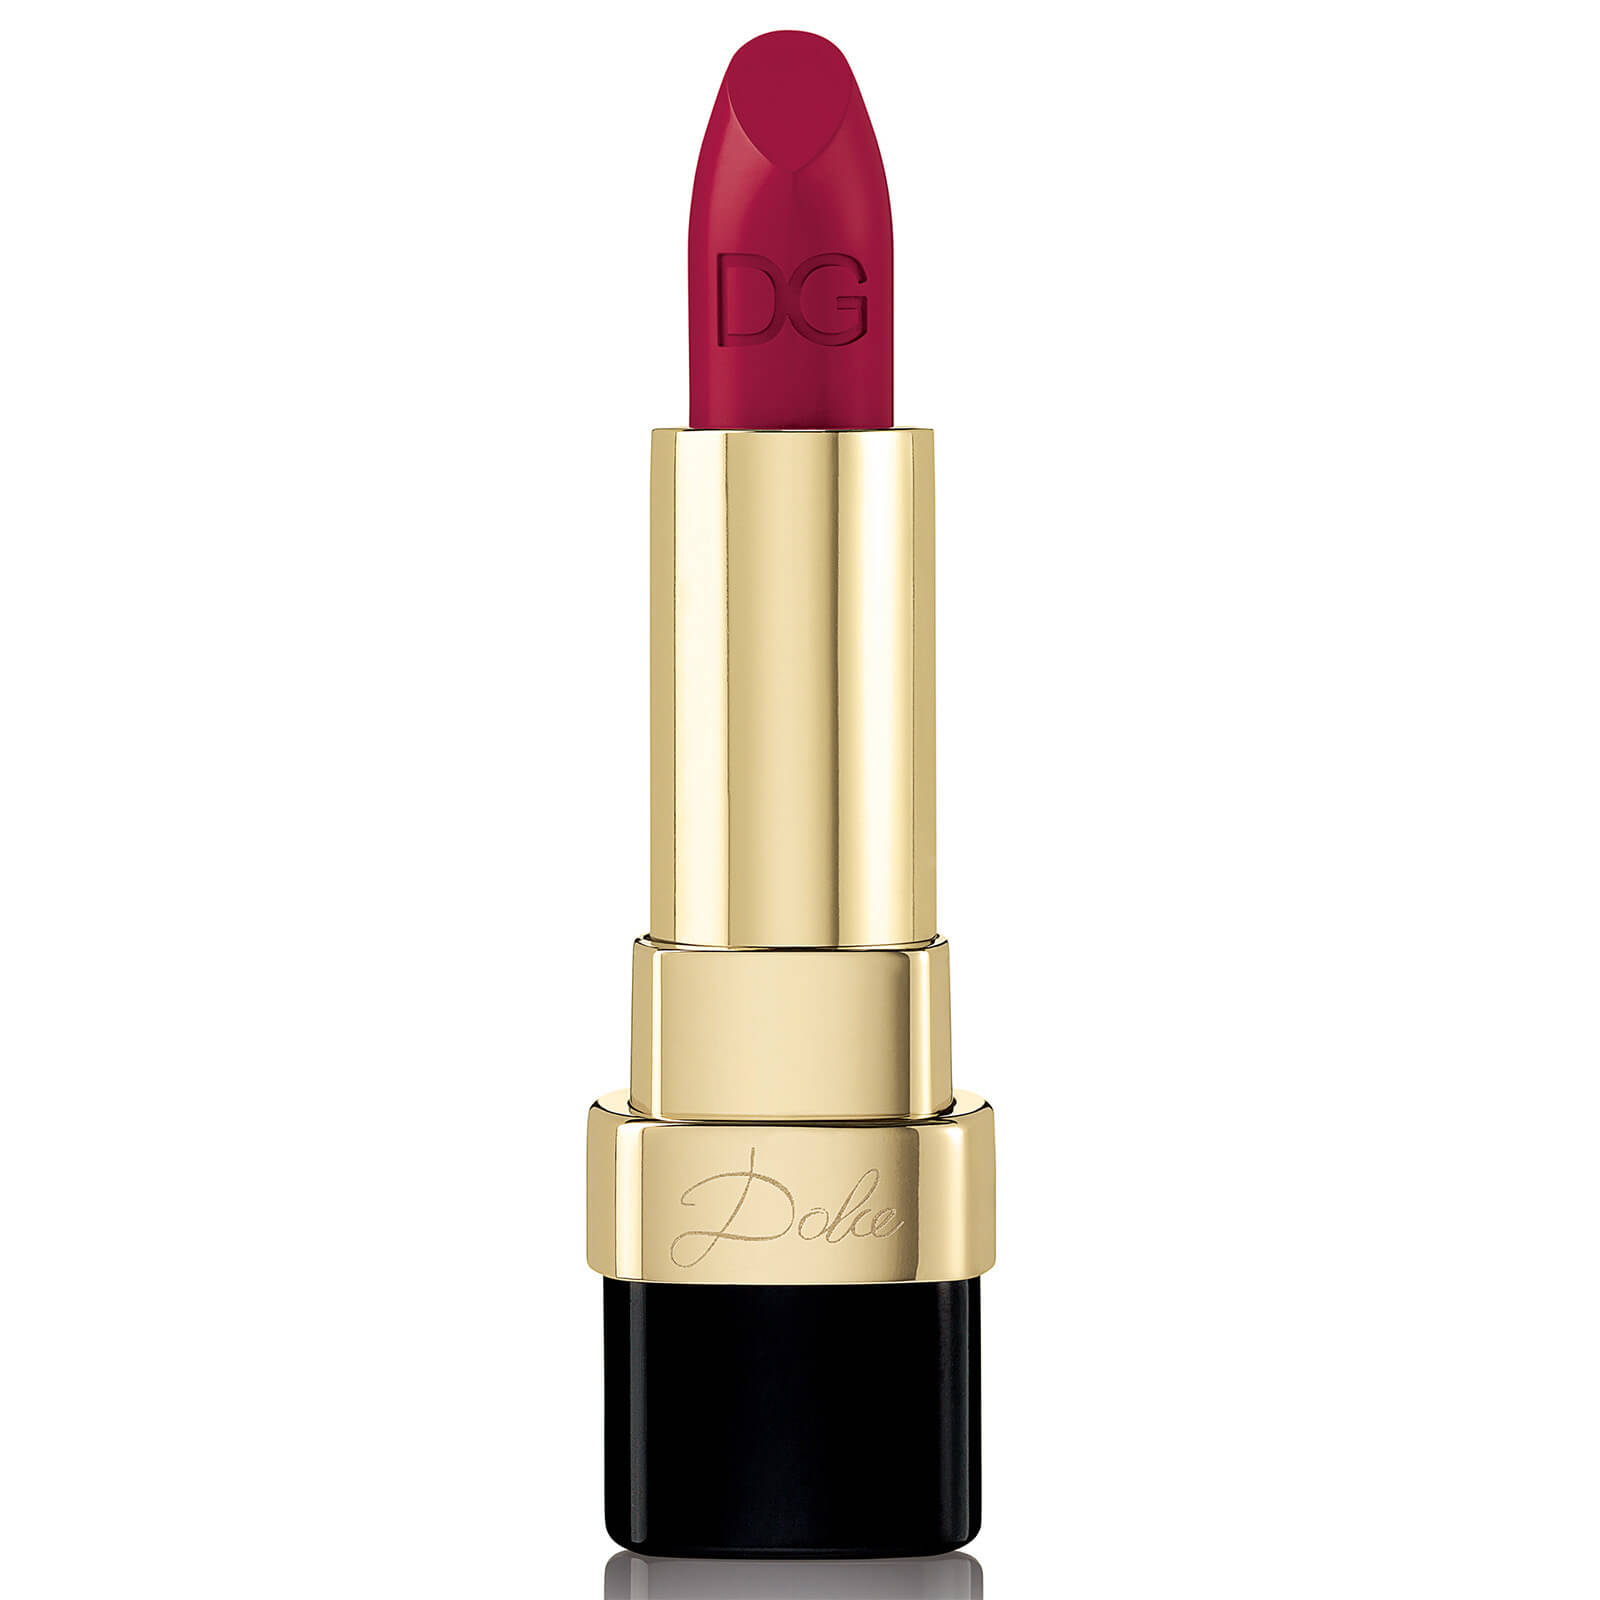 Dolce&Gabbana Dolce Matte Lipstick 3.5g (Various Shades) - 642 Dolce Ruby